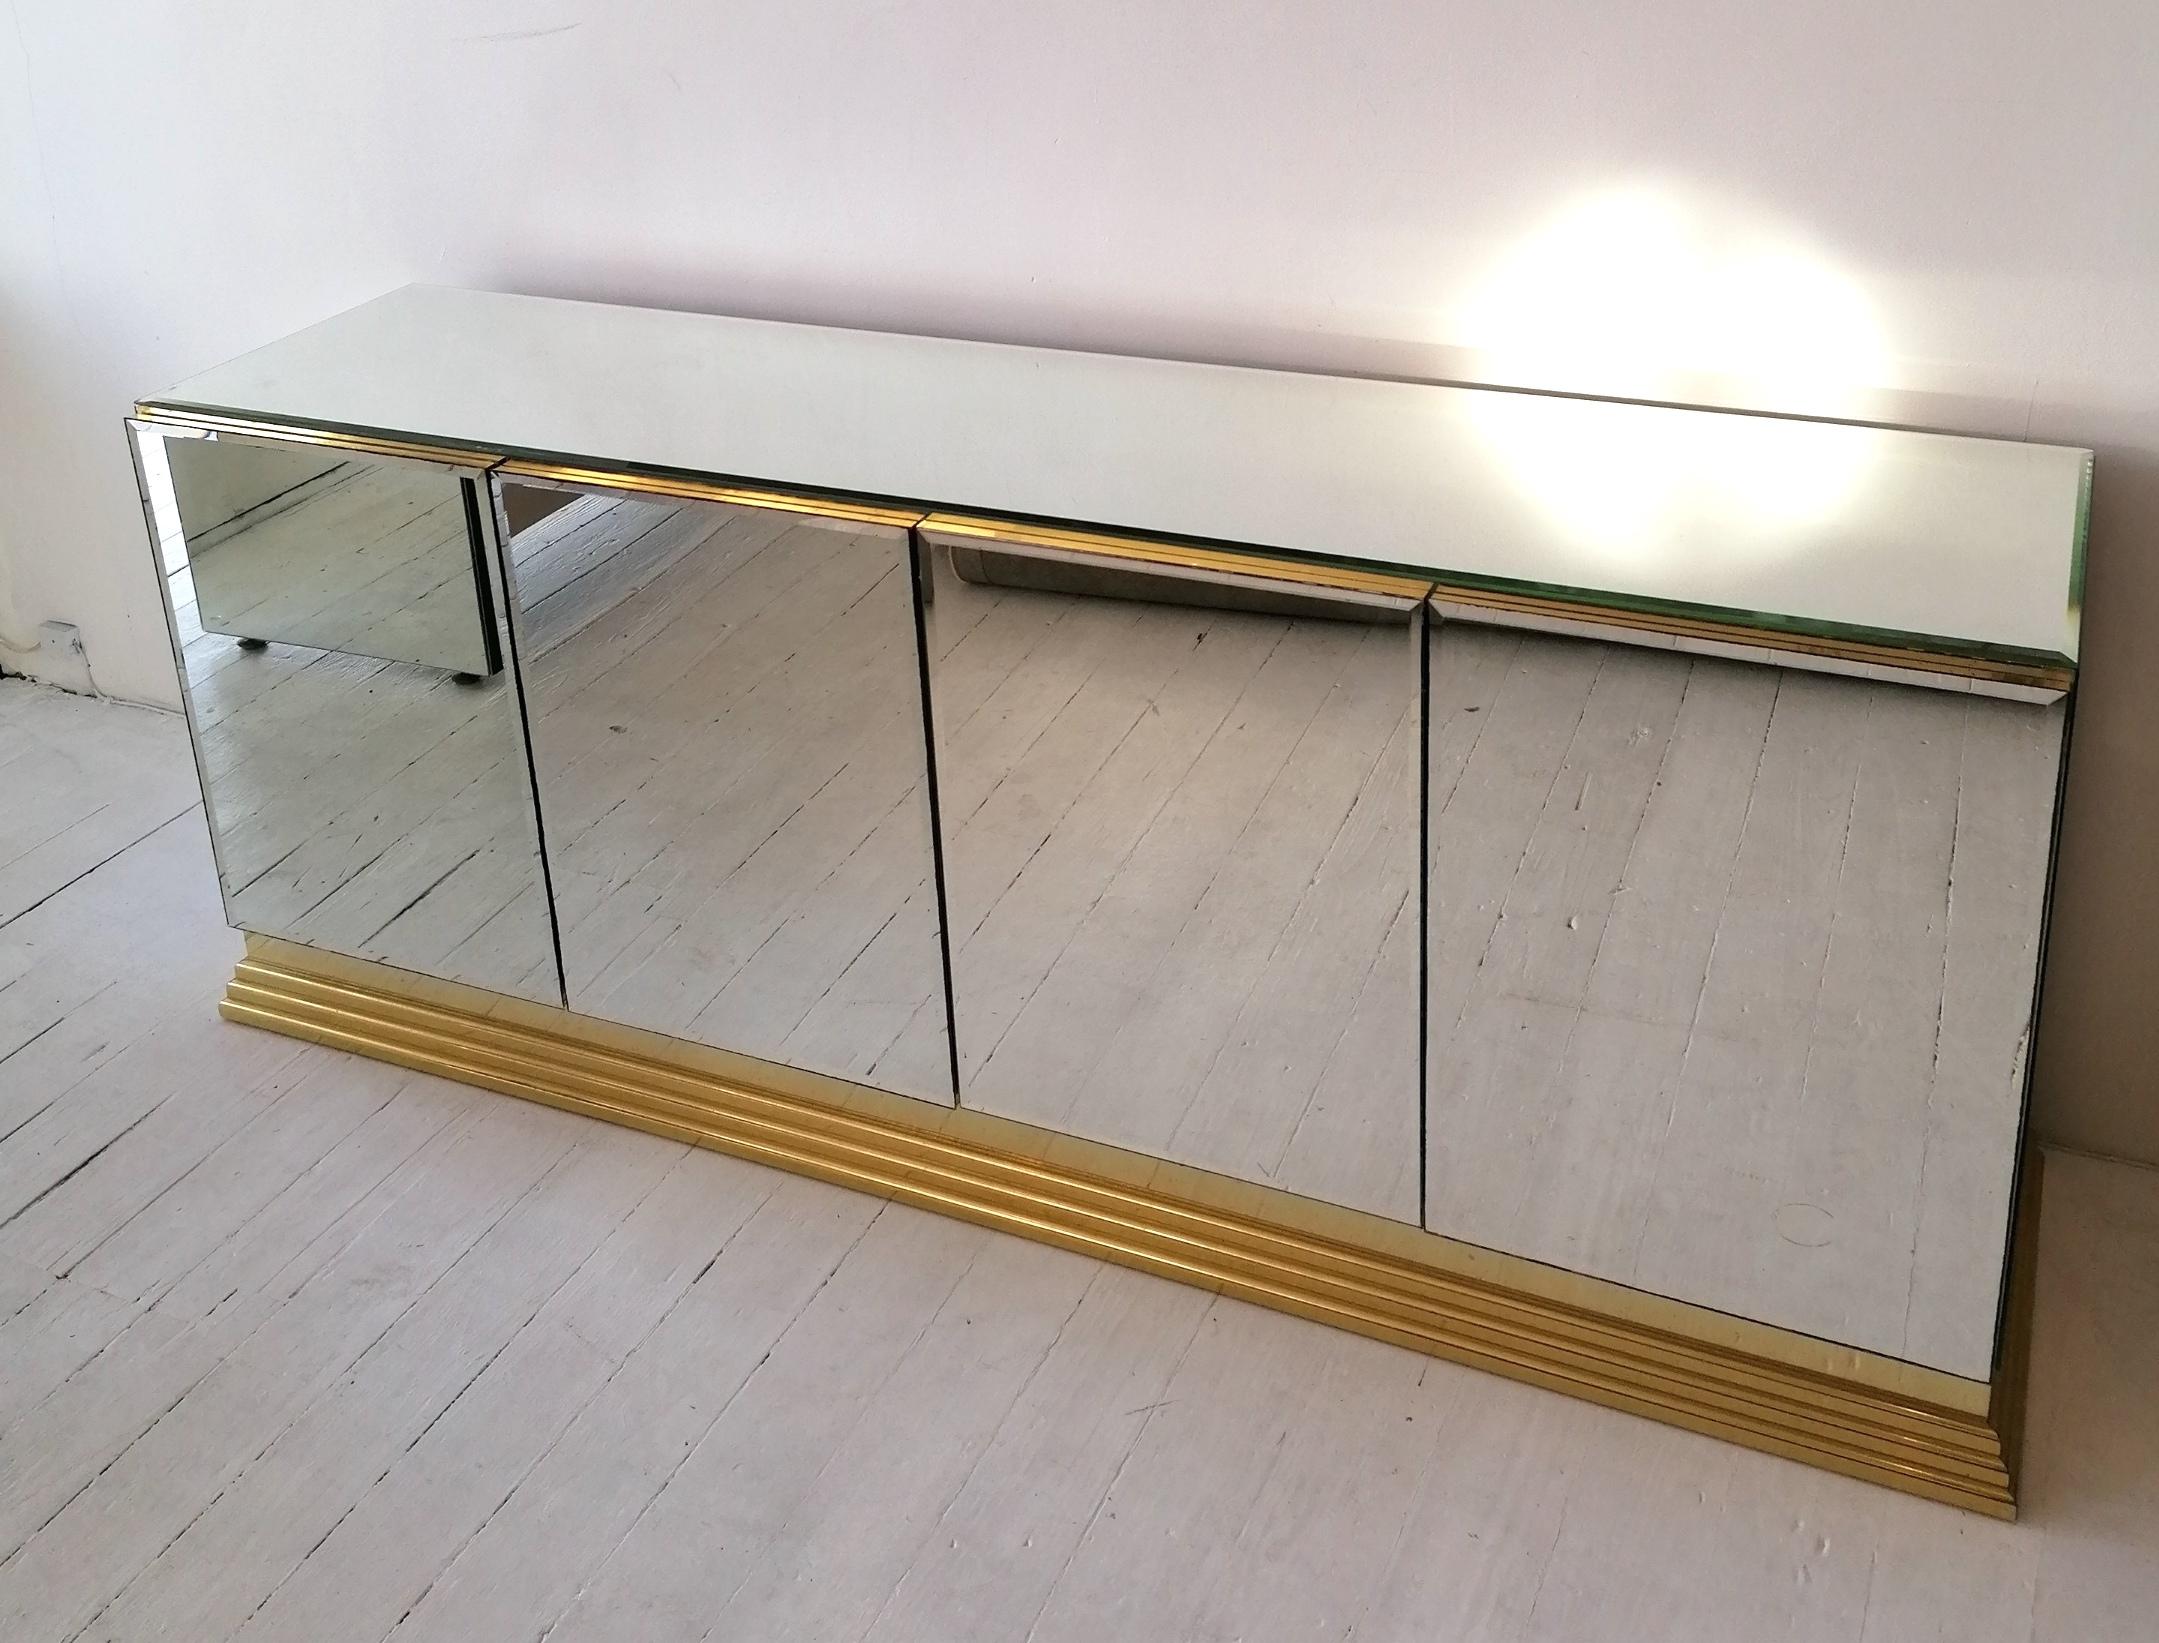 A beautiful vintage mirror glass sideboard by Ello, USA, circa late 1970s/early 80s. This simple & elegant design has a shaped brass metal base. The ends of the cabinet are mirror glass; the top is bevelled mirror glass, as are the door fronts.